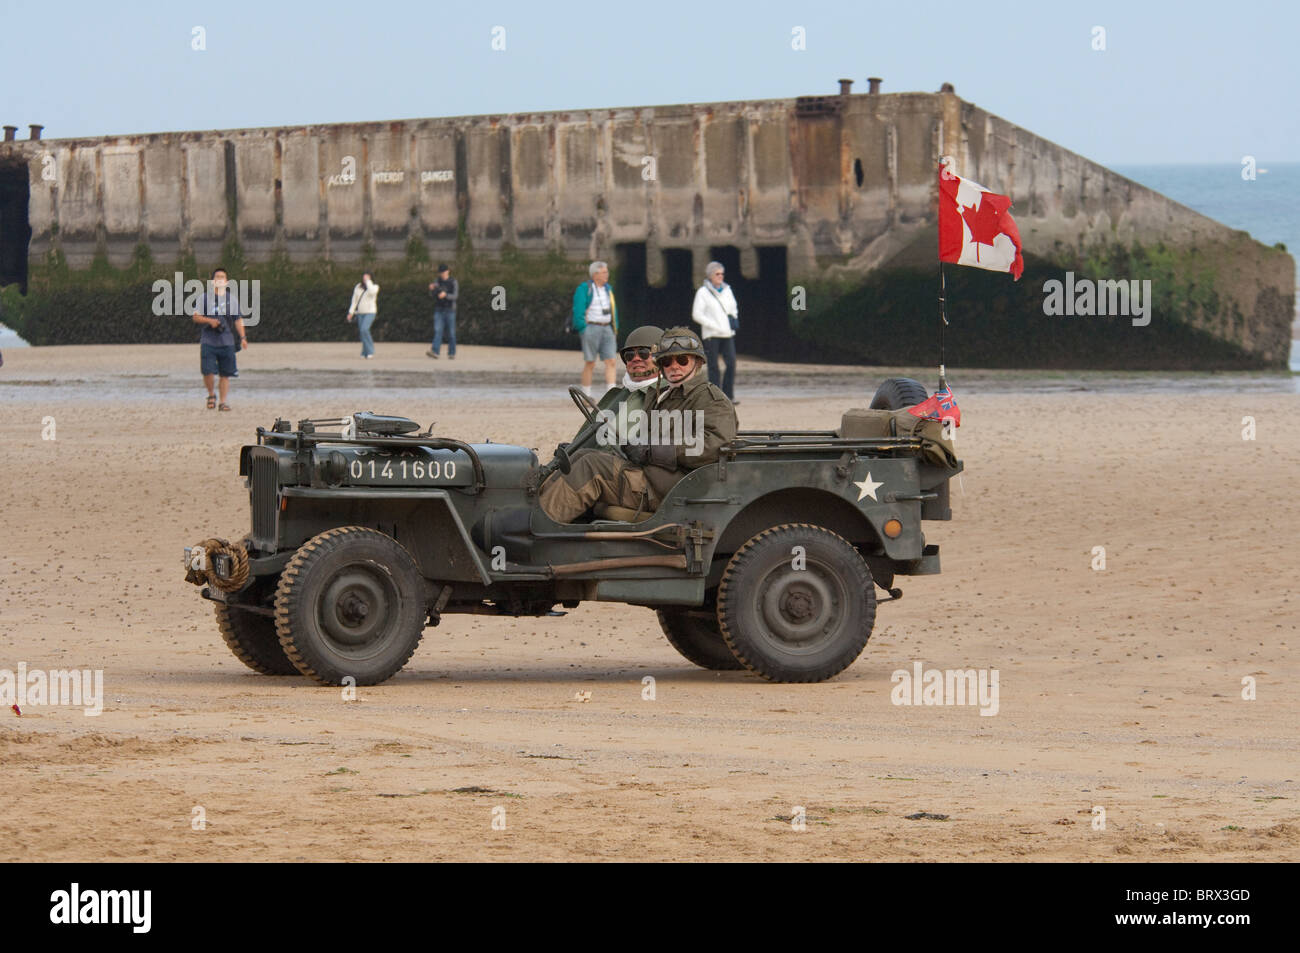 France, Normandy, Arromanches. Vintage jeep with soldiers in uniform. Stock Photo